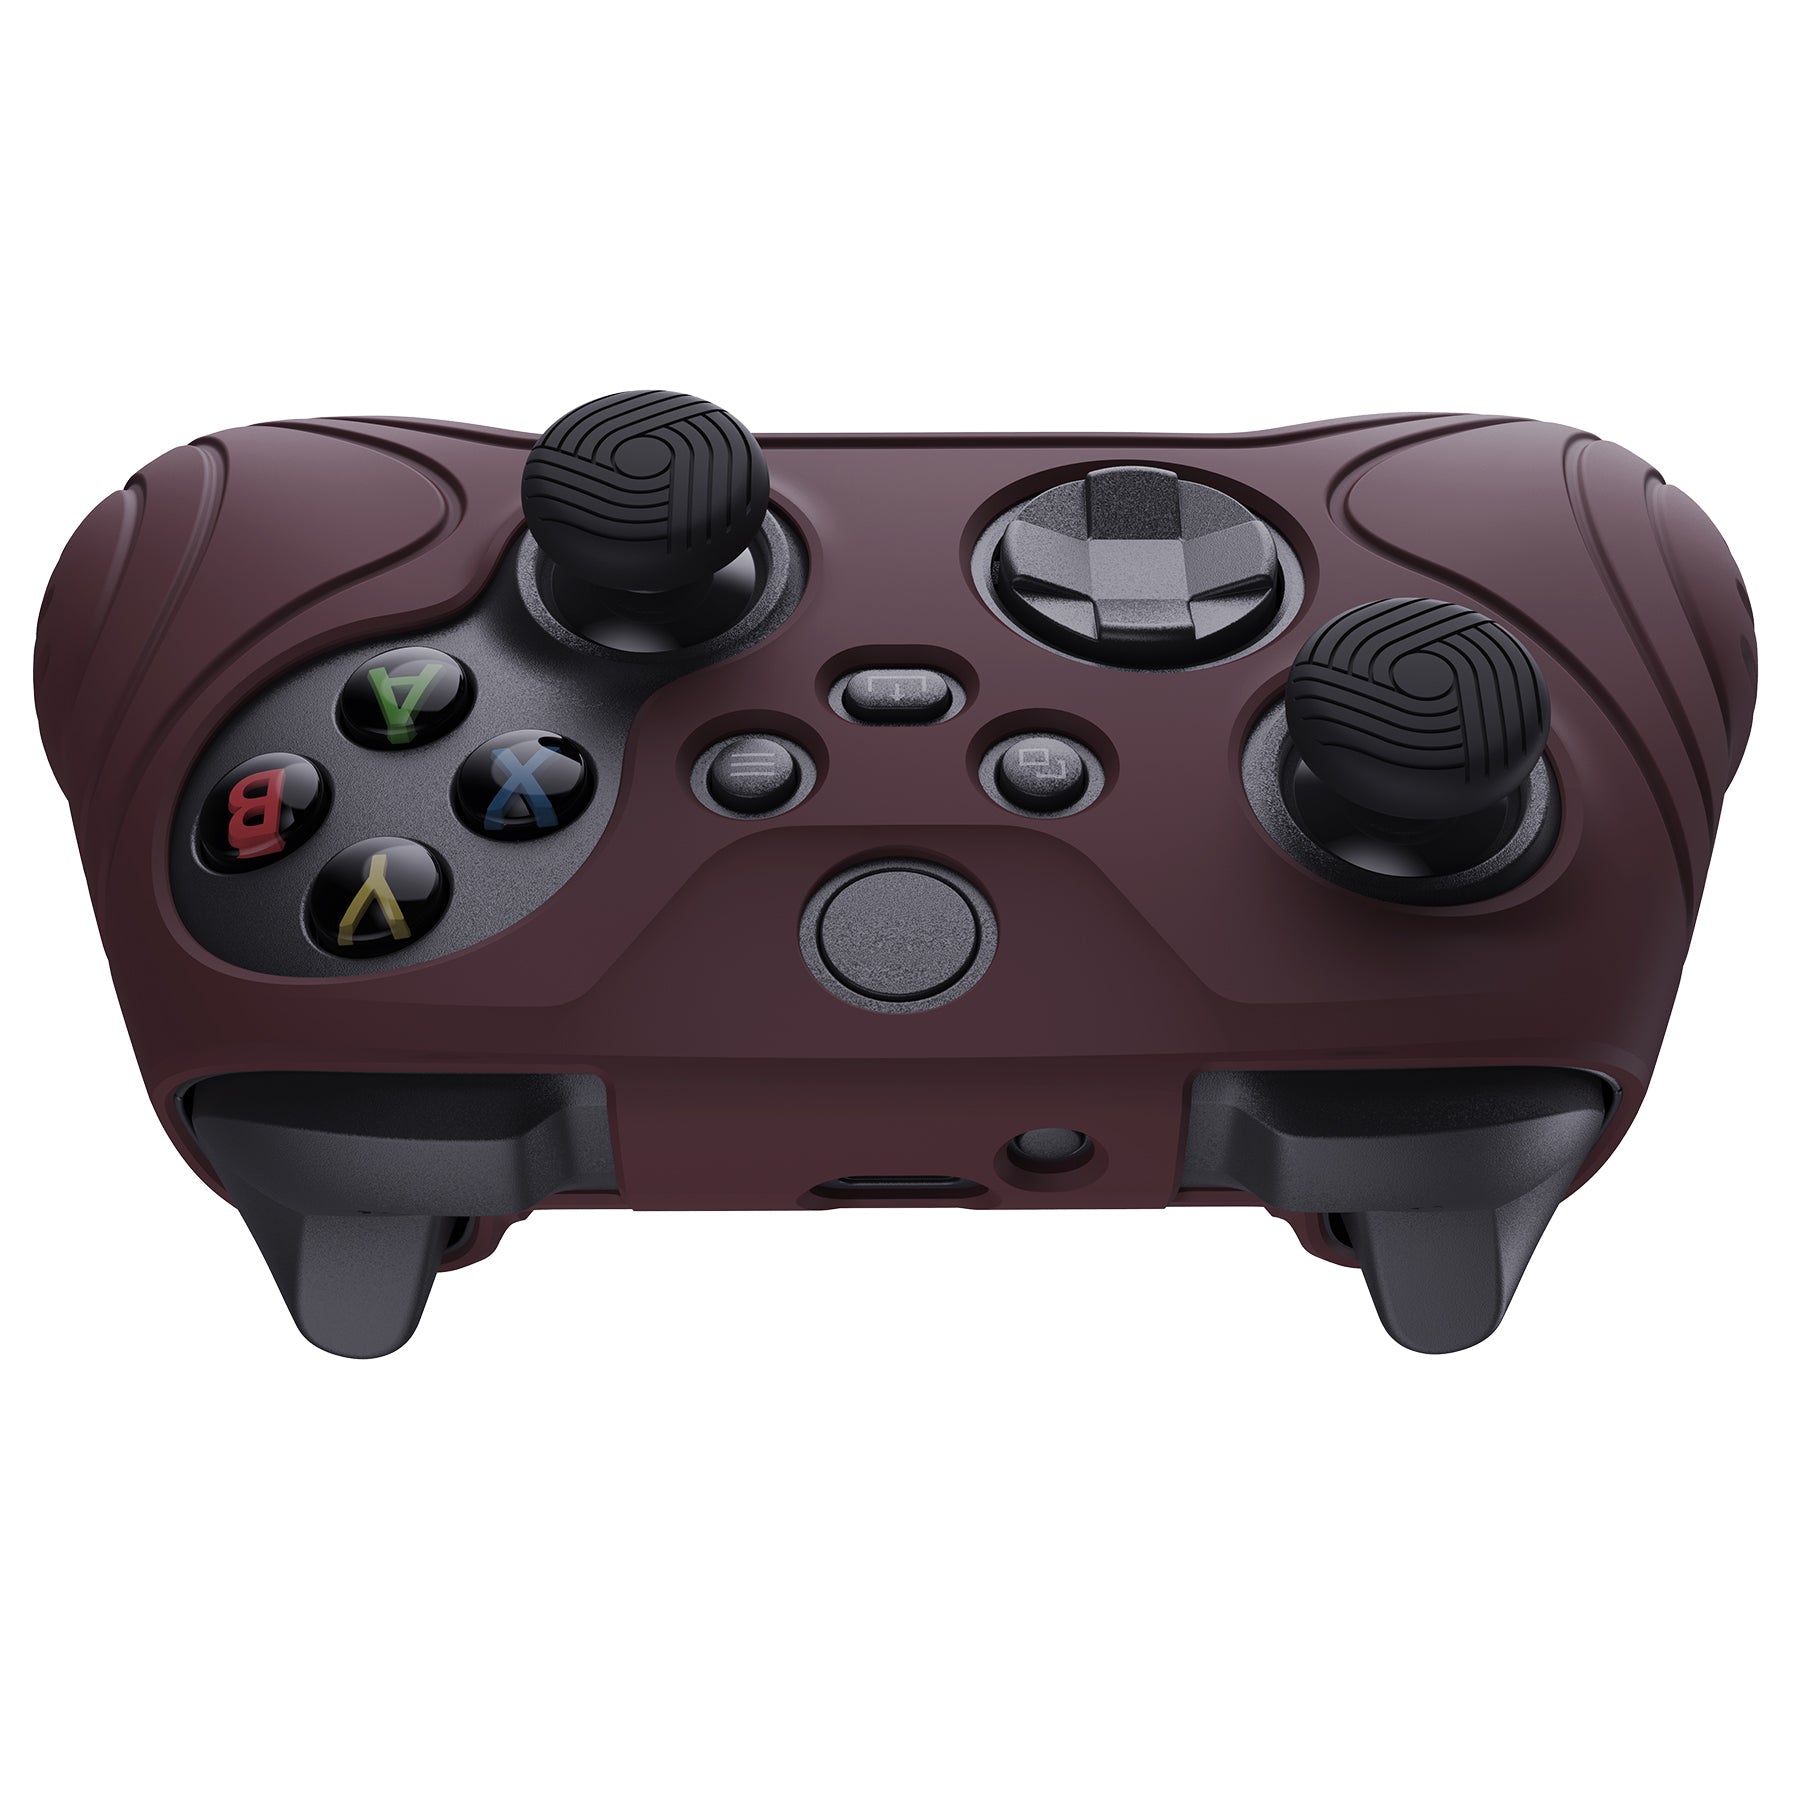 PlayVital Samurai Edition Wine Red Anti-slip Controller Grip Silicone Skin, Ergonomic Soft Rubber Protective Case Cover for Xbox Series S/X Controller with Black Thumb Stick Caps - WAX3011 PlayVital